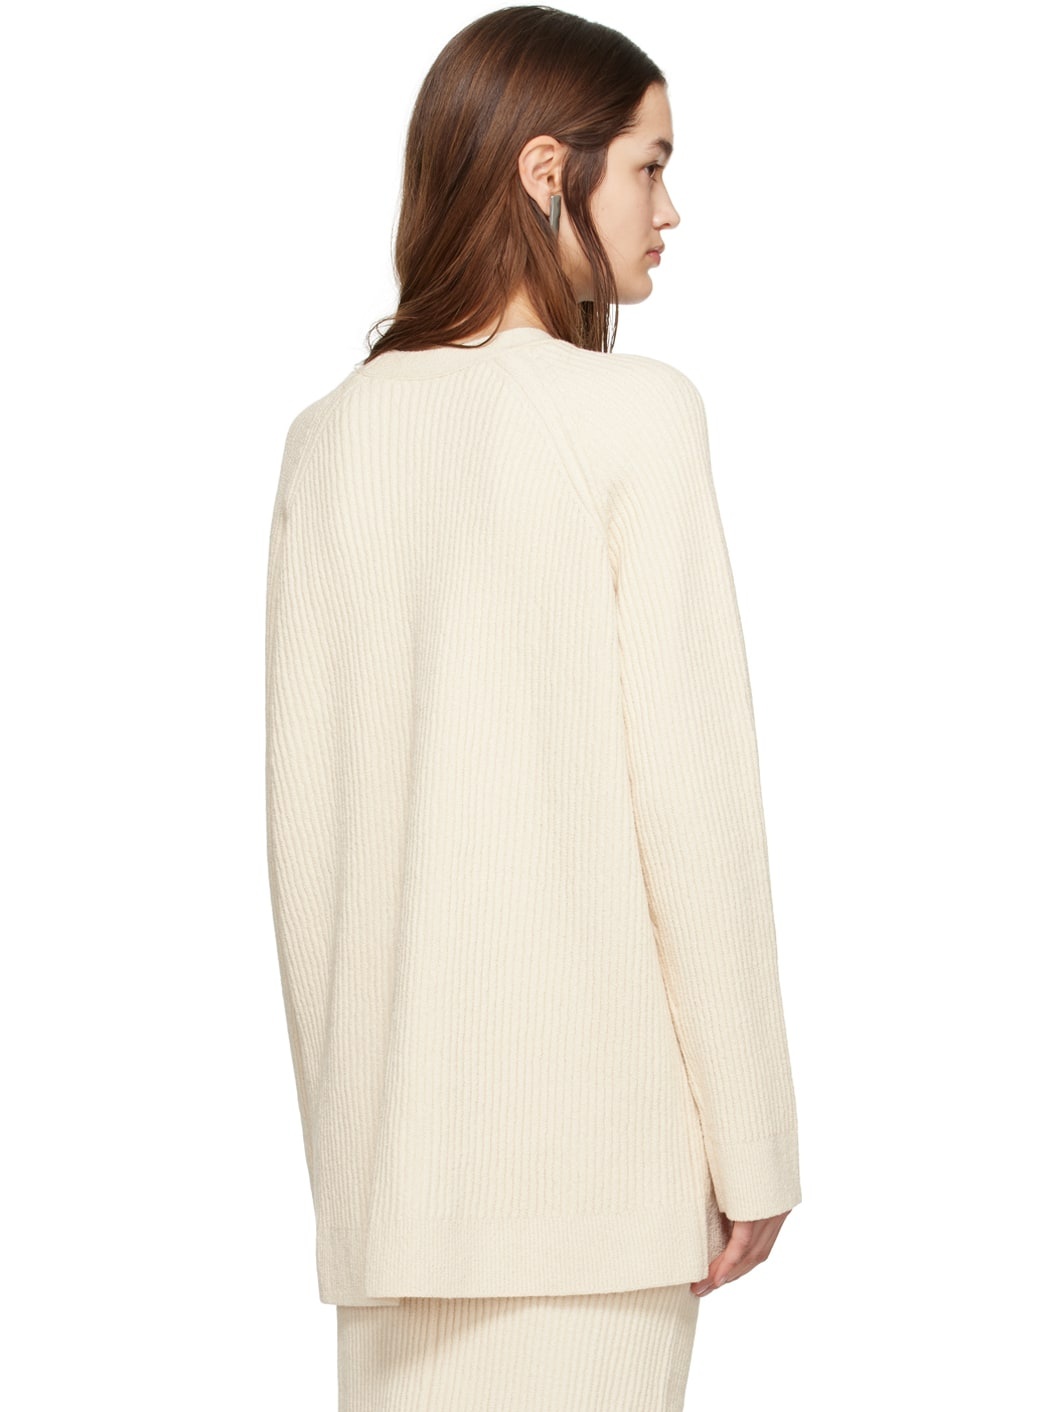 Off-White Button Cardigan - 3